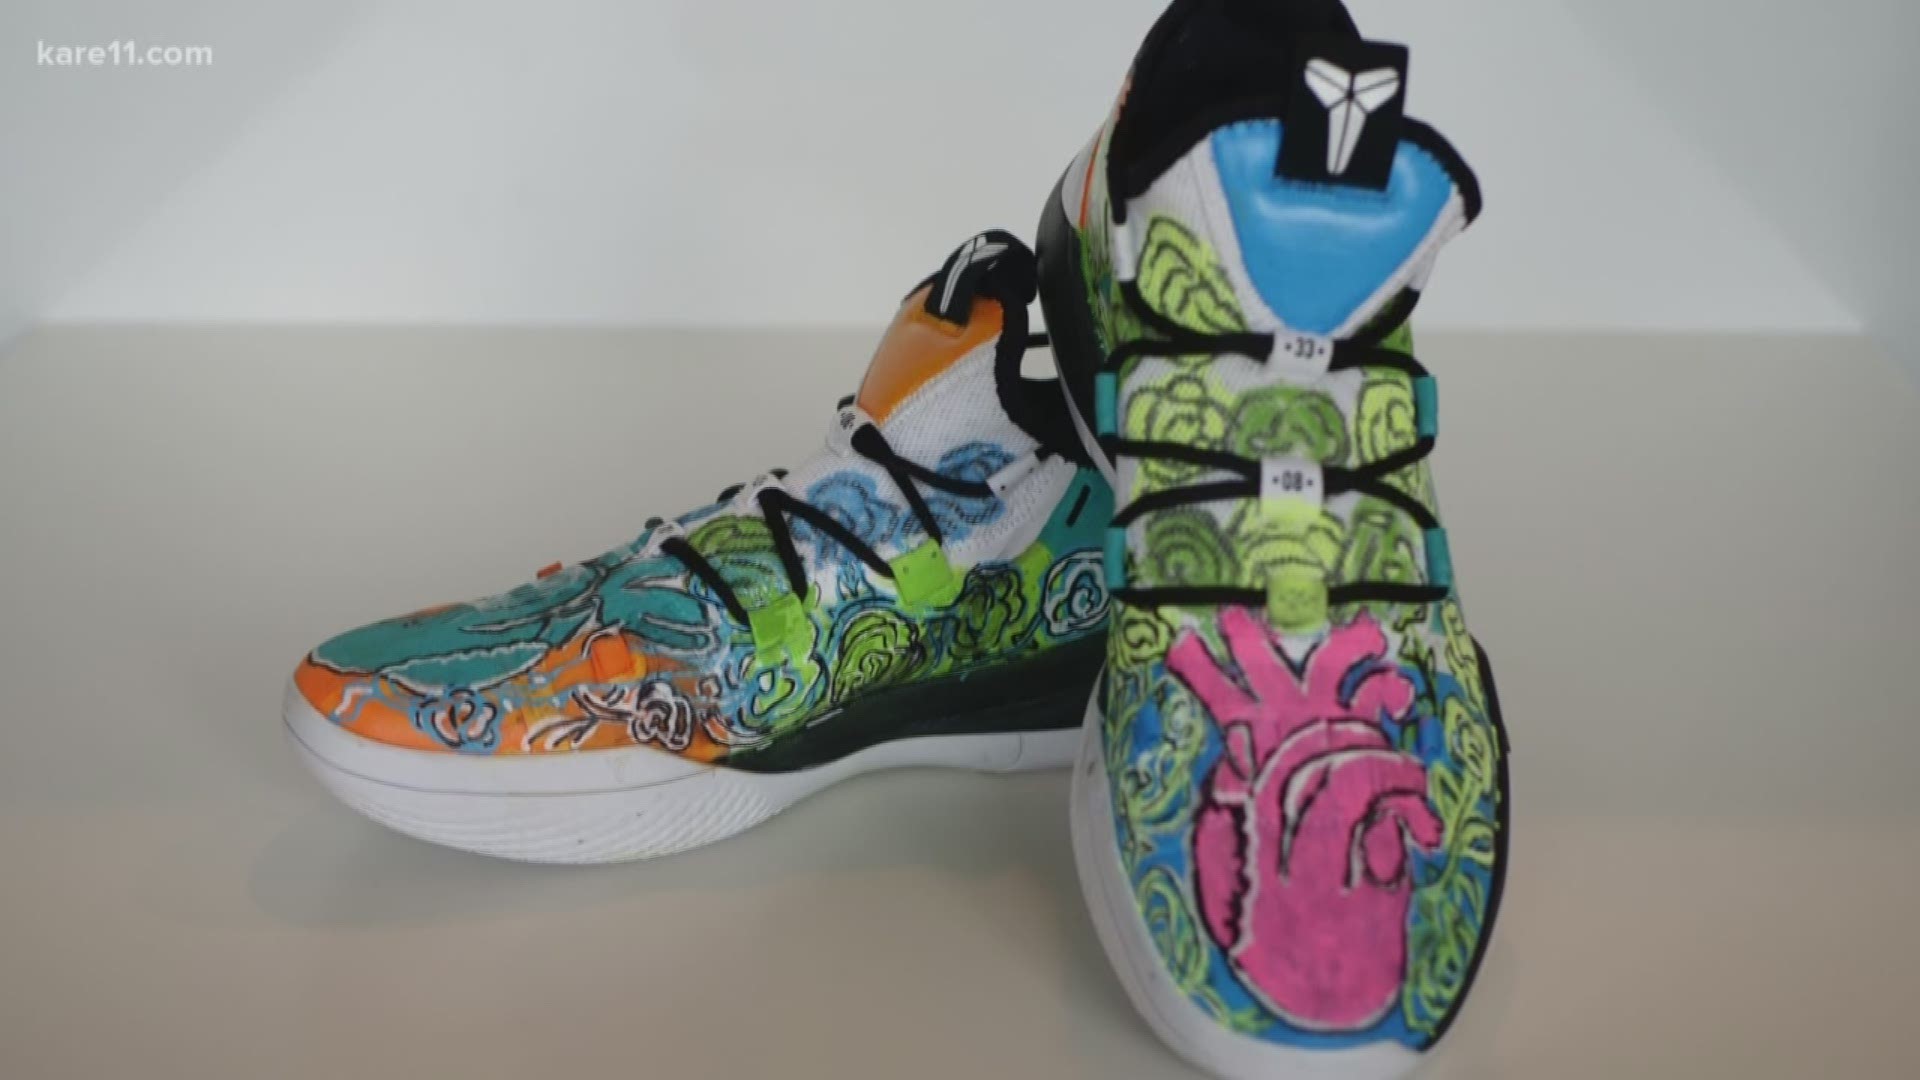 Last week, in a partnership with ‘We Are Lions’ Jessica designed a pair of basketball shoes for the WNBA’s Seattle Storm player, Jewel Lloyd.